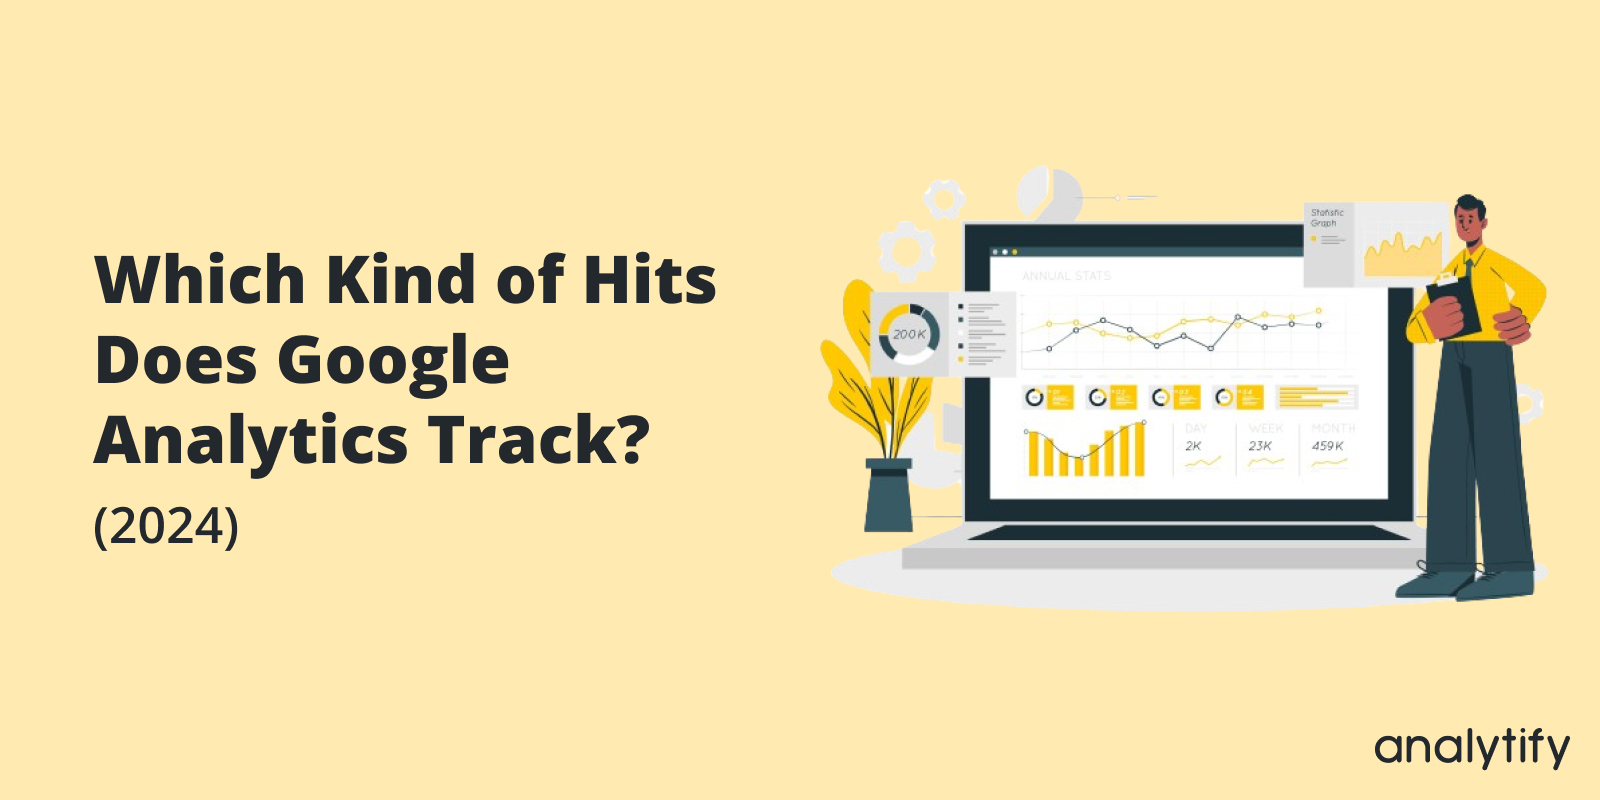 Which Kind of Hits Does Google Analytics Track